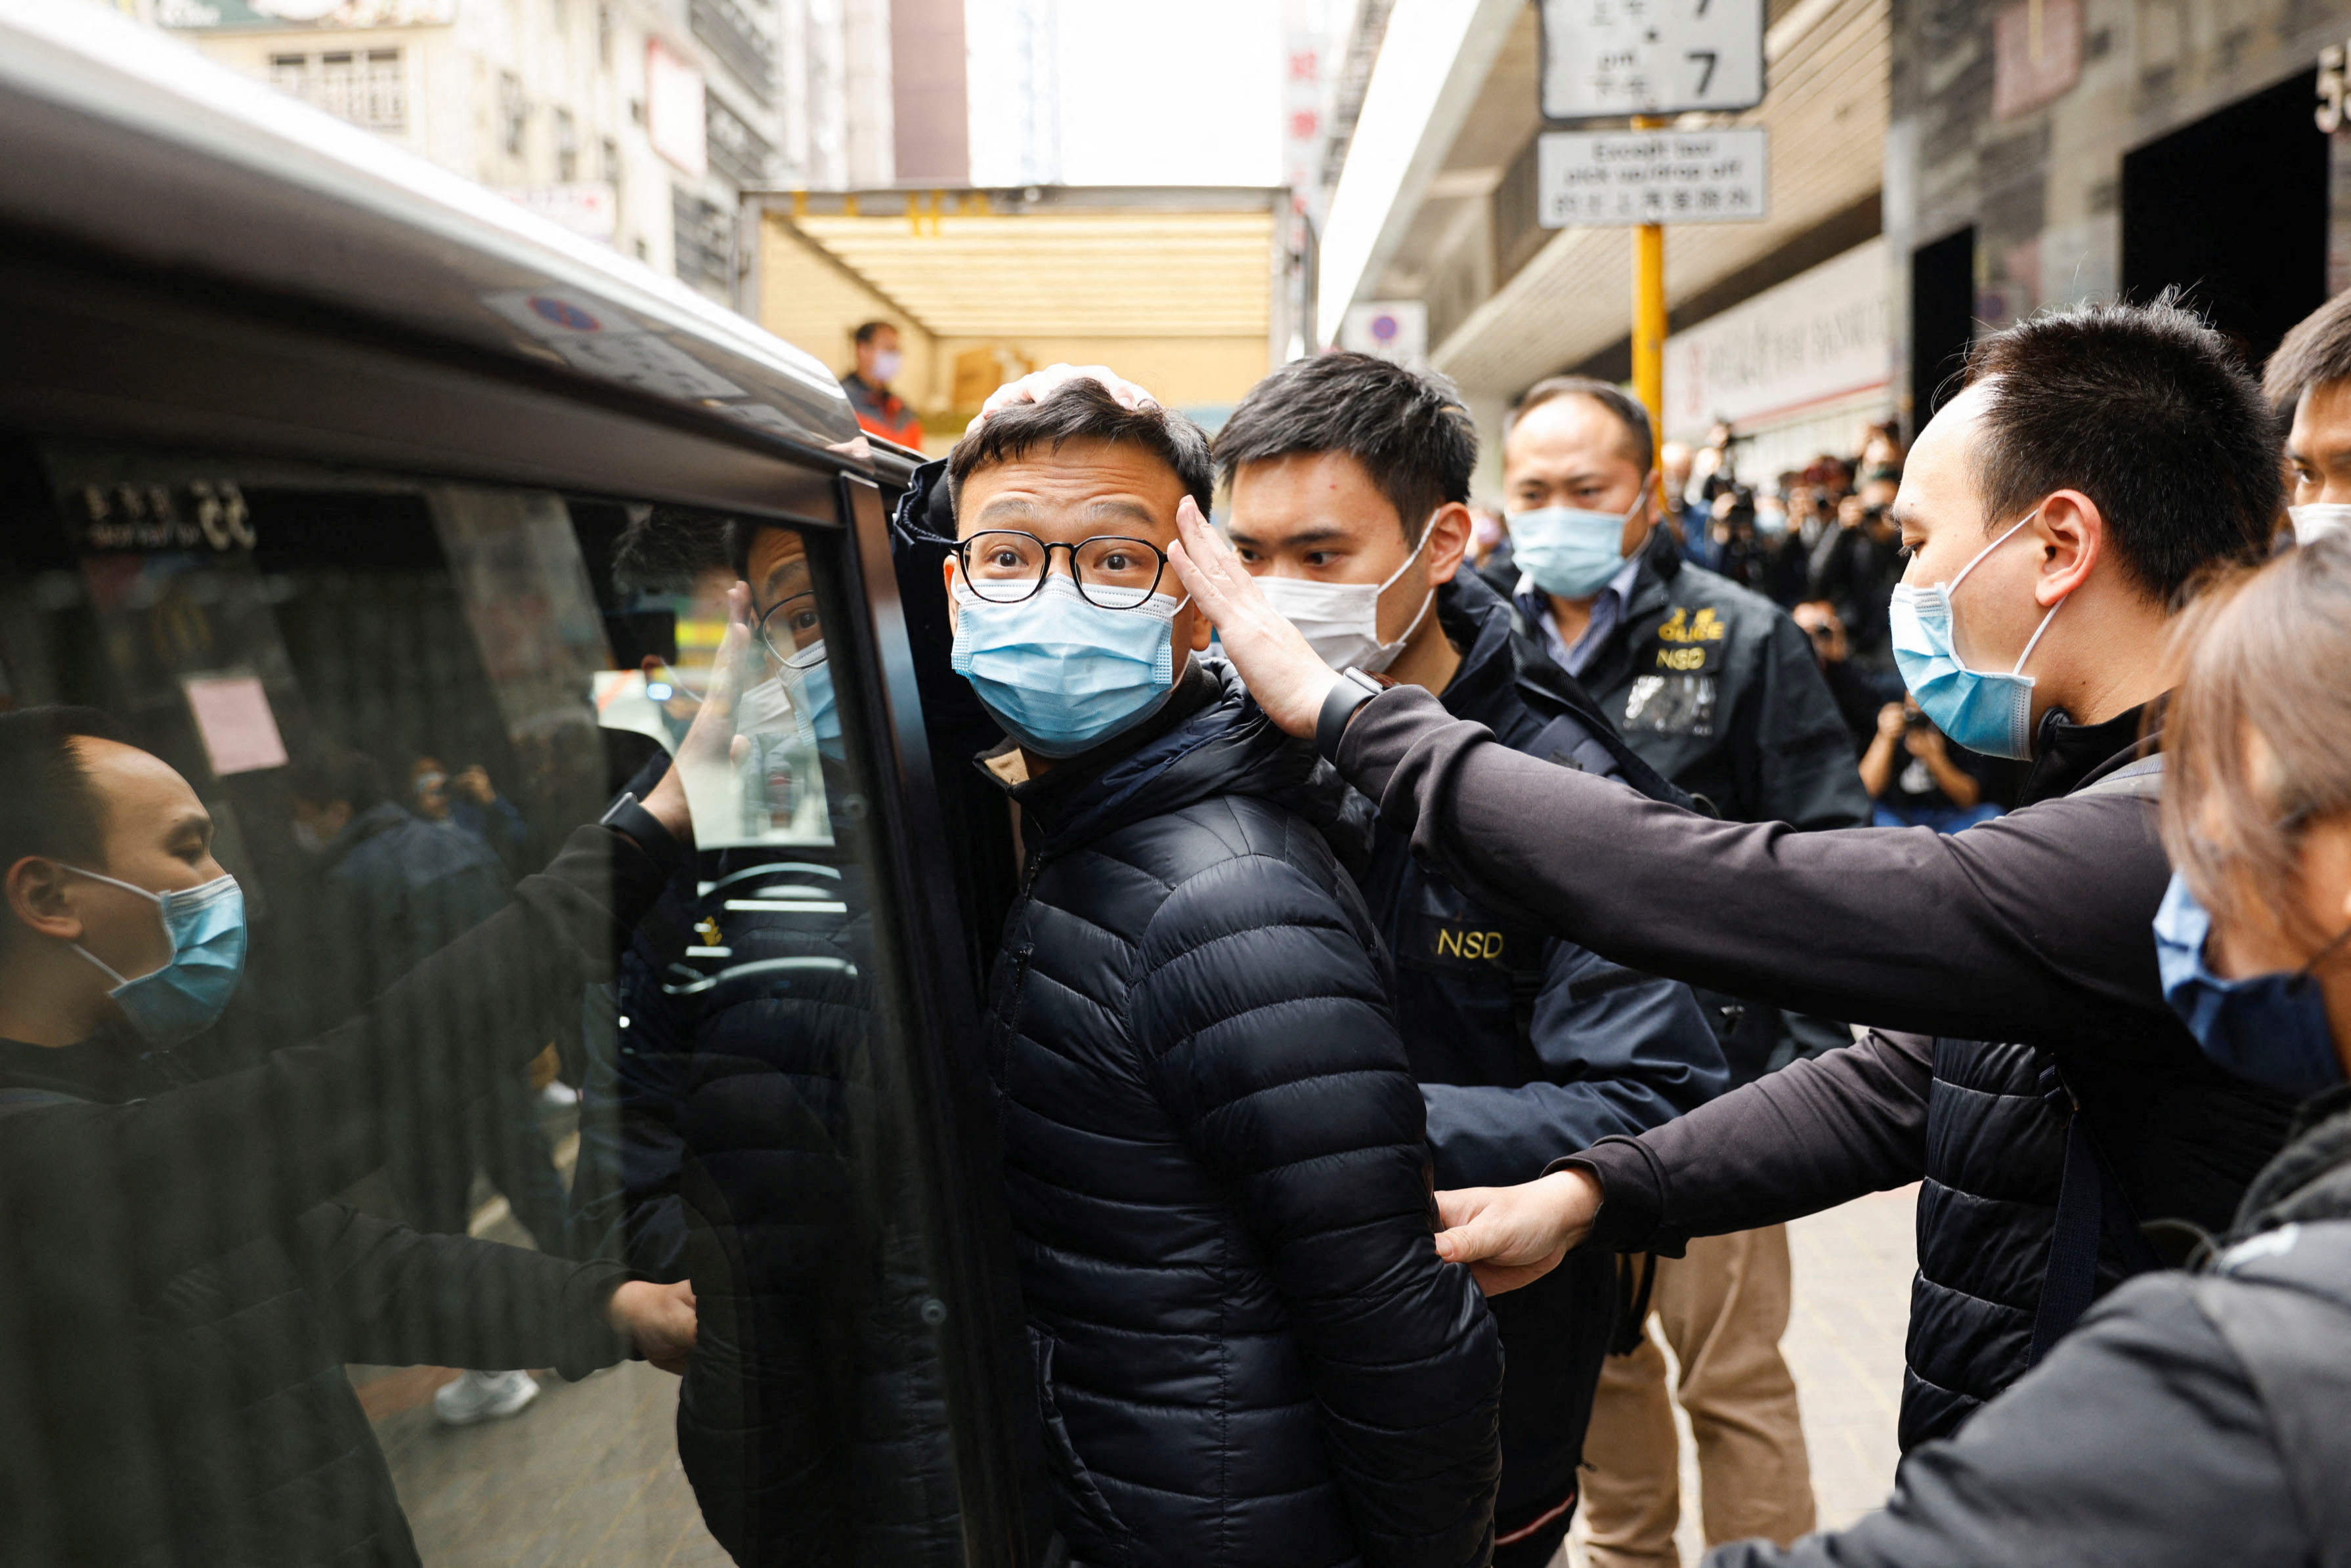 Stand News acting chief editor Patrick Lam is escorted by police as they leave after the police searched his office in Hong Kong